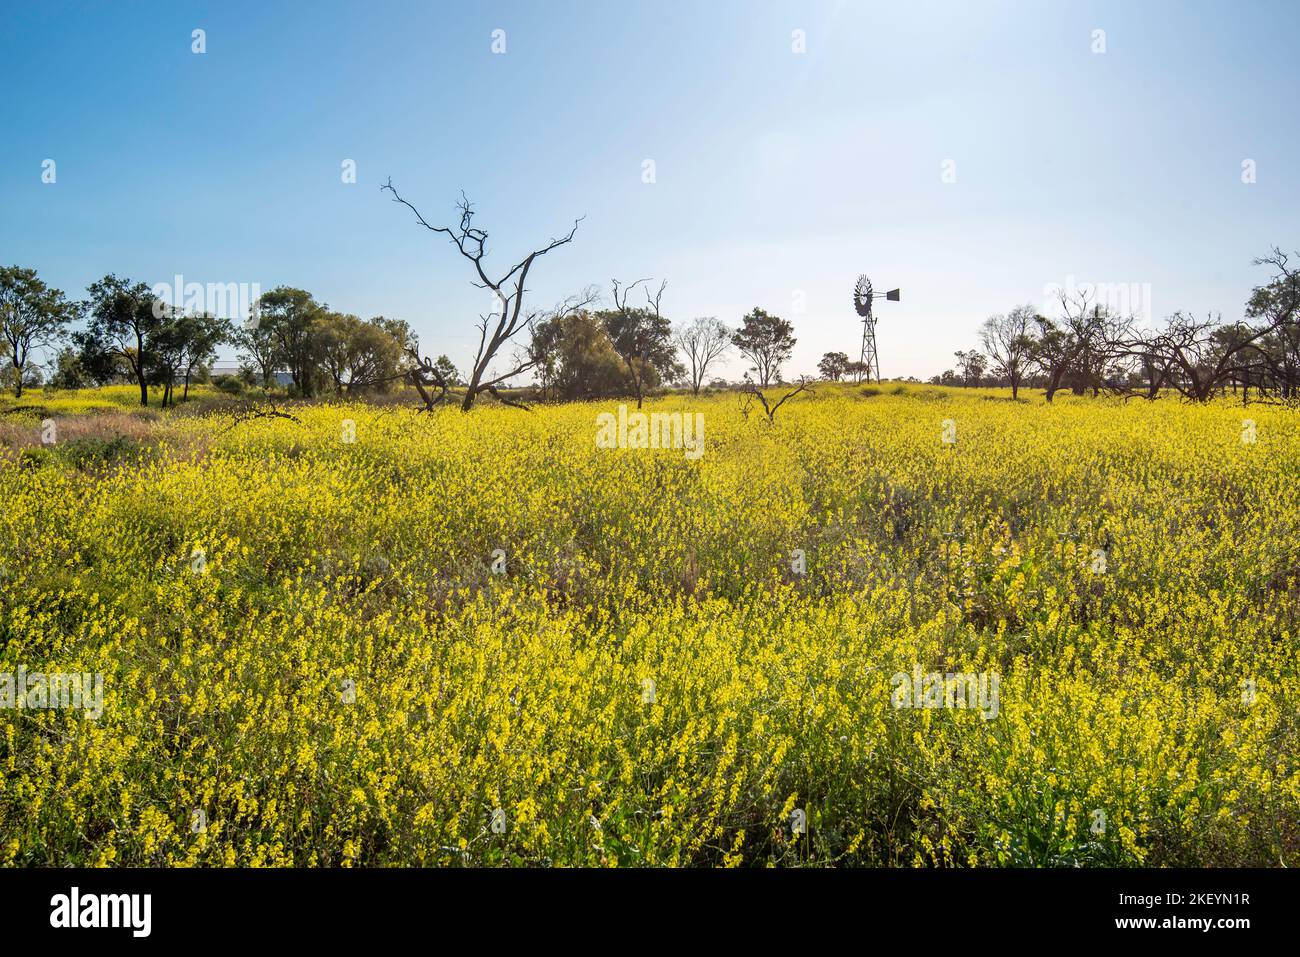 Sheep grazing pasture or paddock with Turnip weed (Rapistrum rugosum) growing waist high, provides a yellow sea of stock feed on an Australian farm Stock Photo